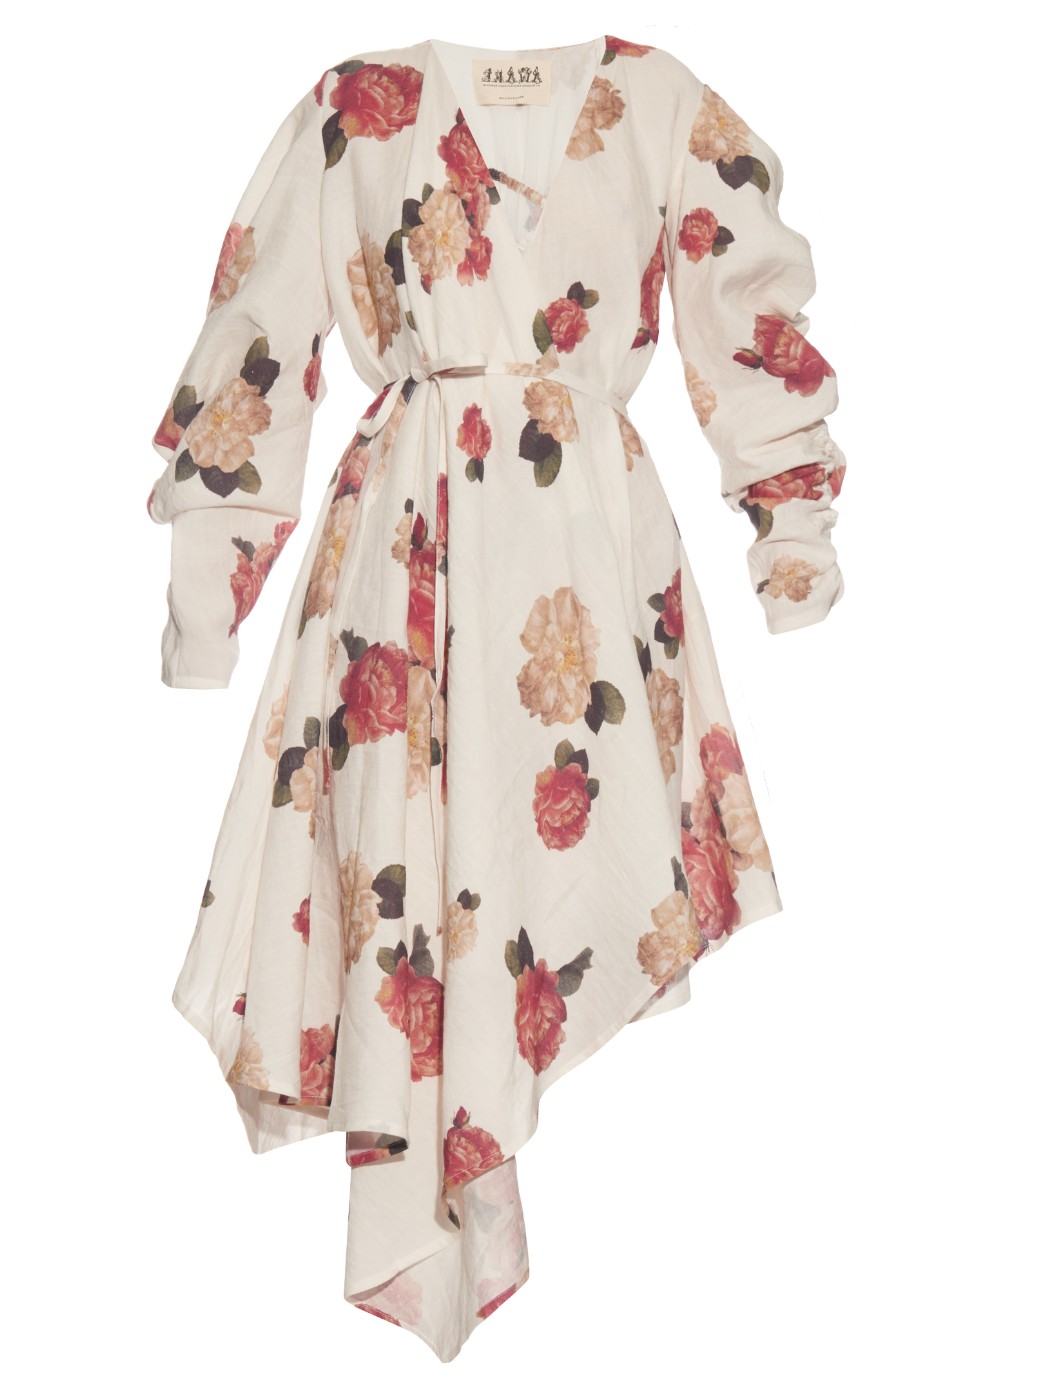 www.matchesfashion.com:intl:products:A-W-A-K-E--Floral-print-wrap-front-dress--1049281